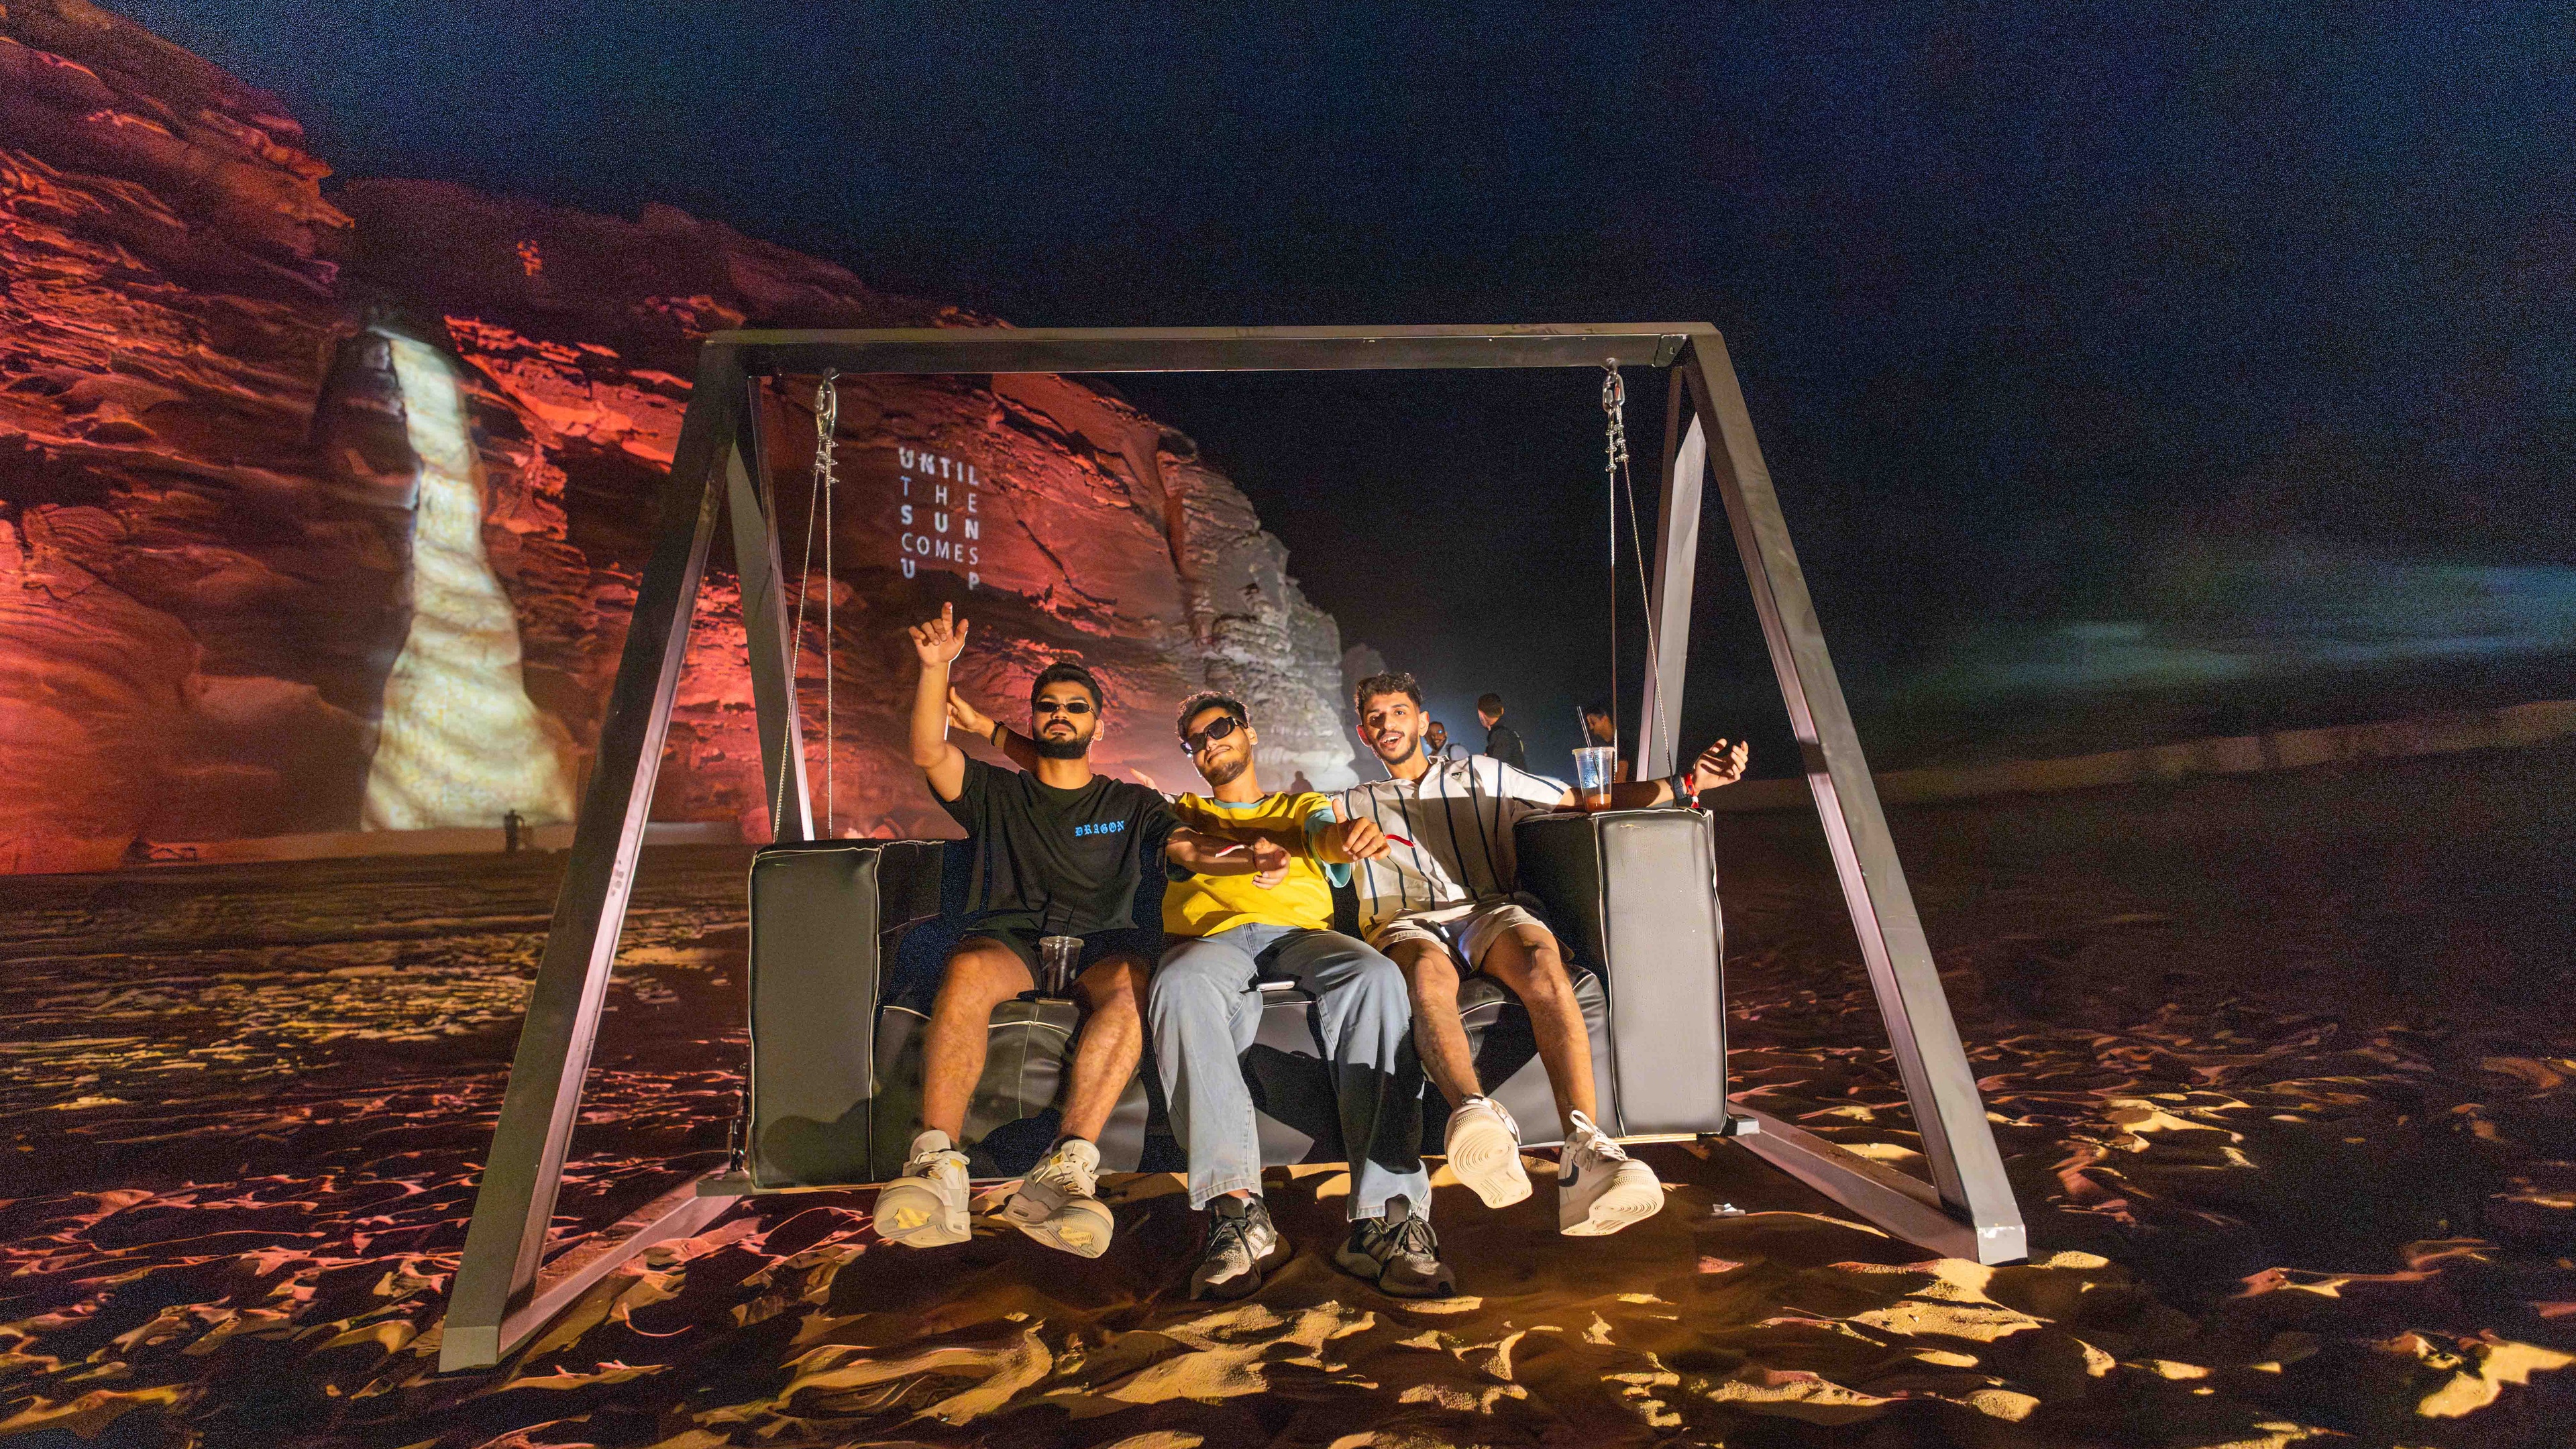 3 men on a wooden custom swing in the middle of the dessert at festival in front of rocky setting